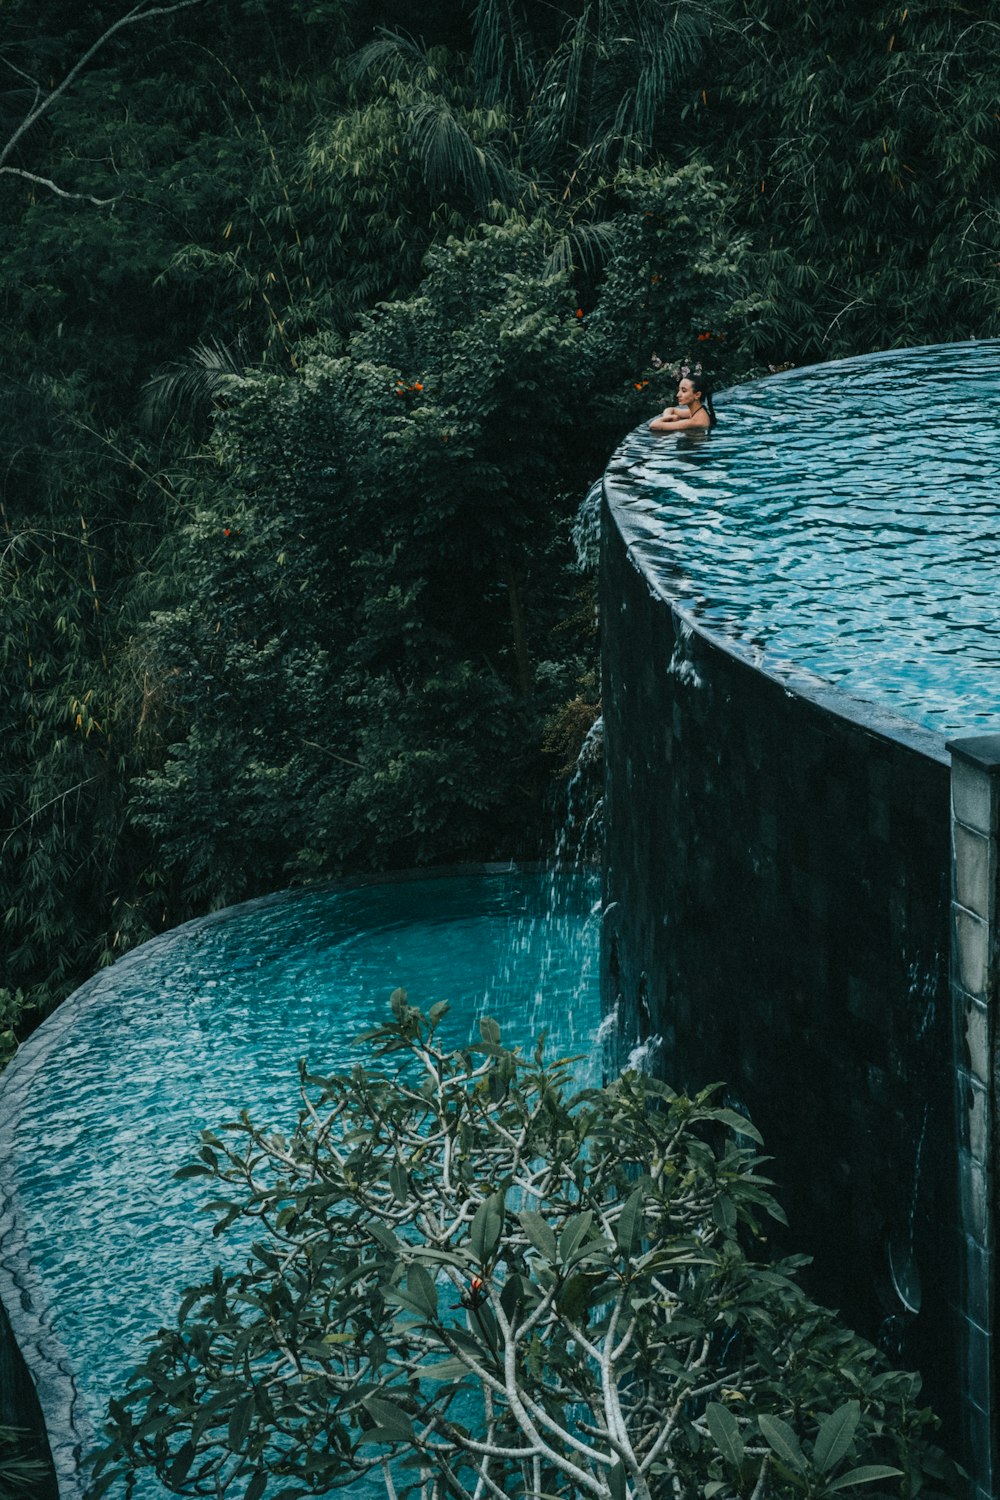 a man swimming in a pool surrounded by greenery